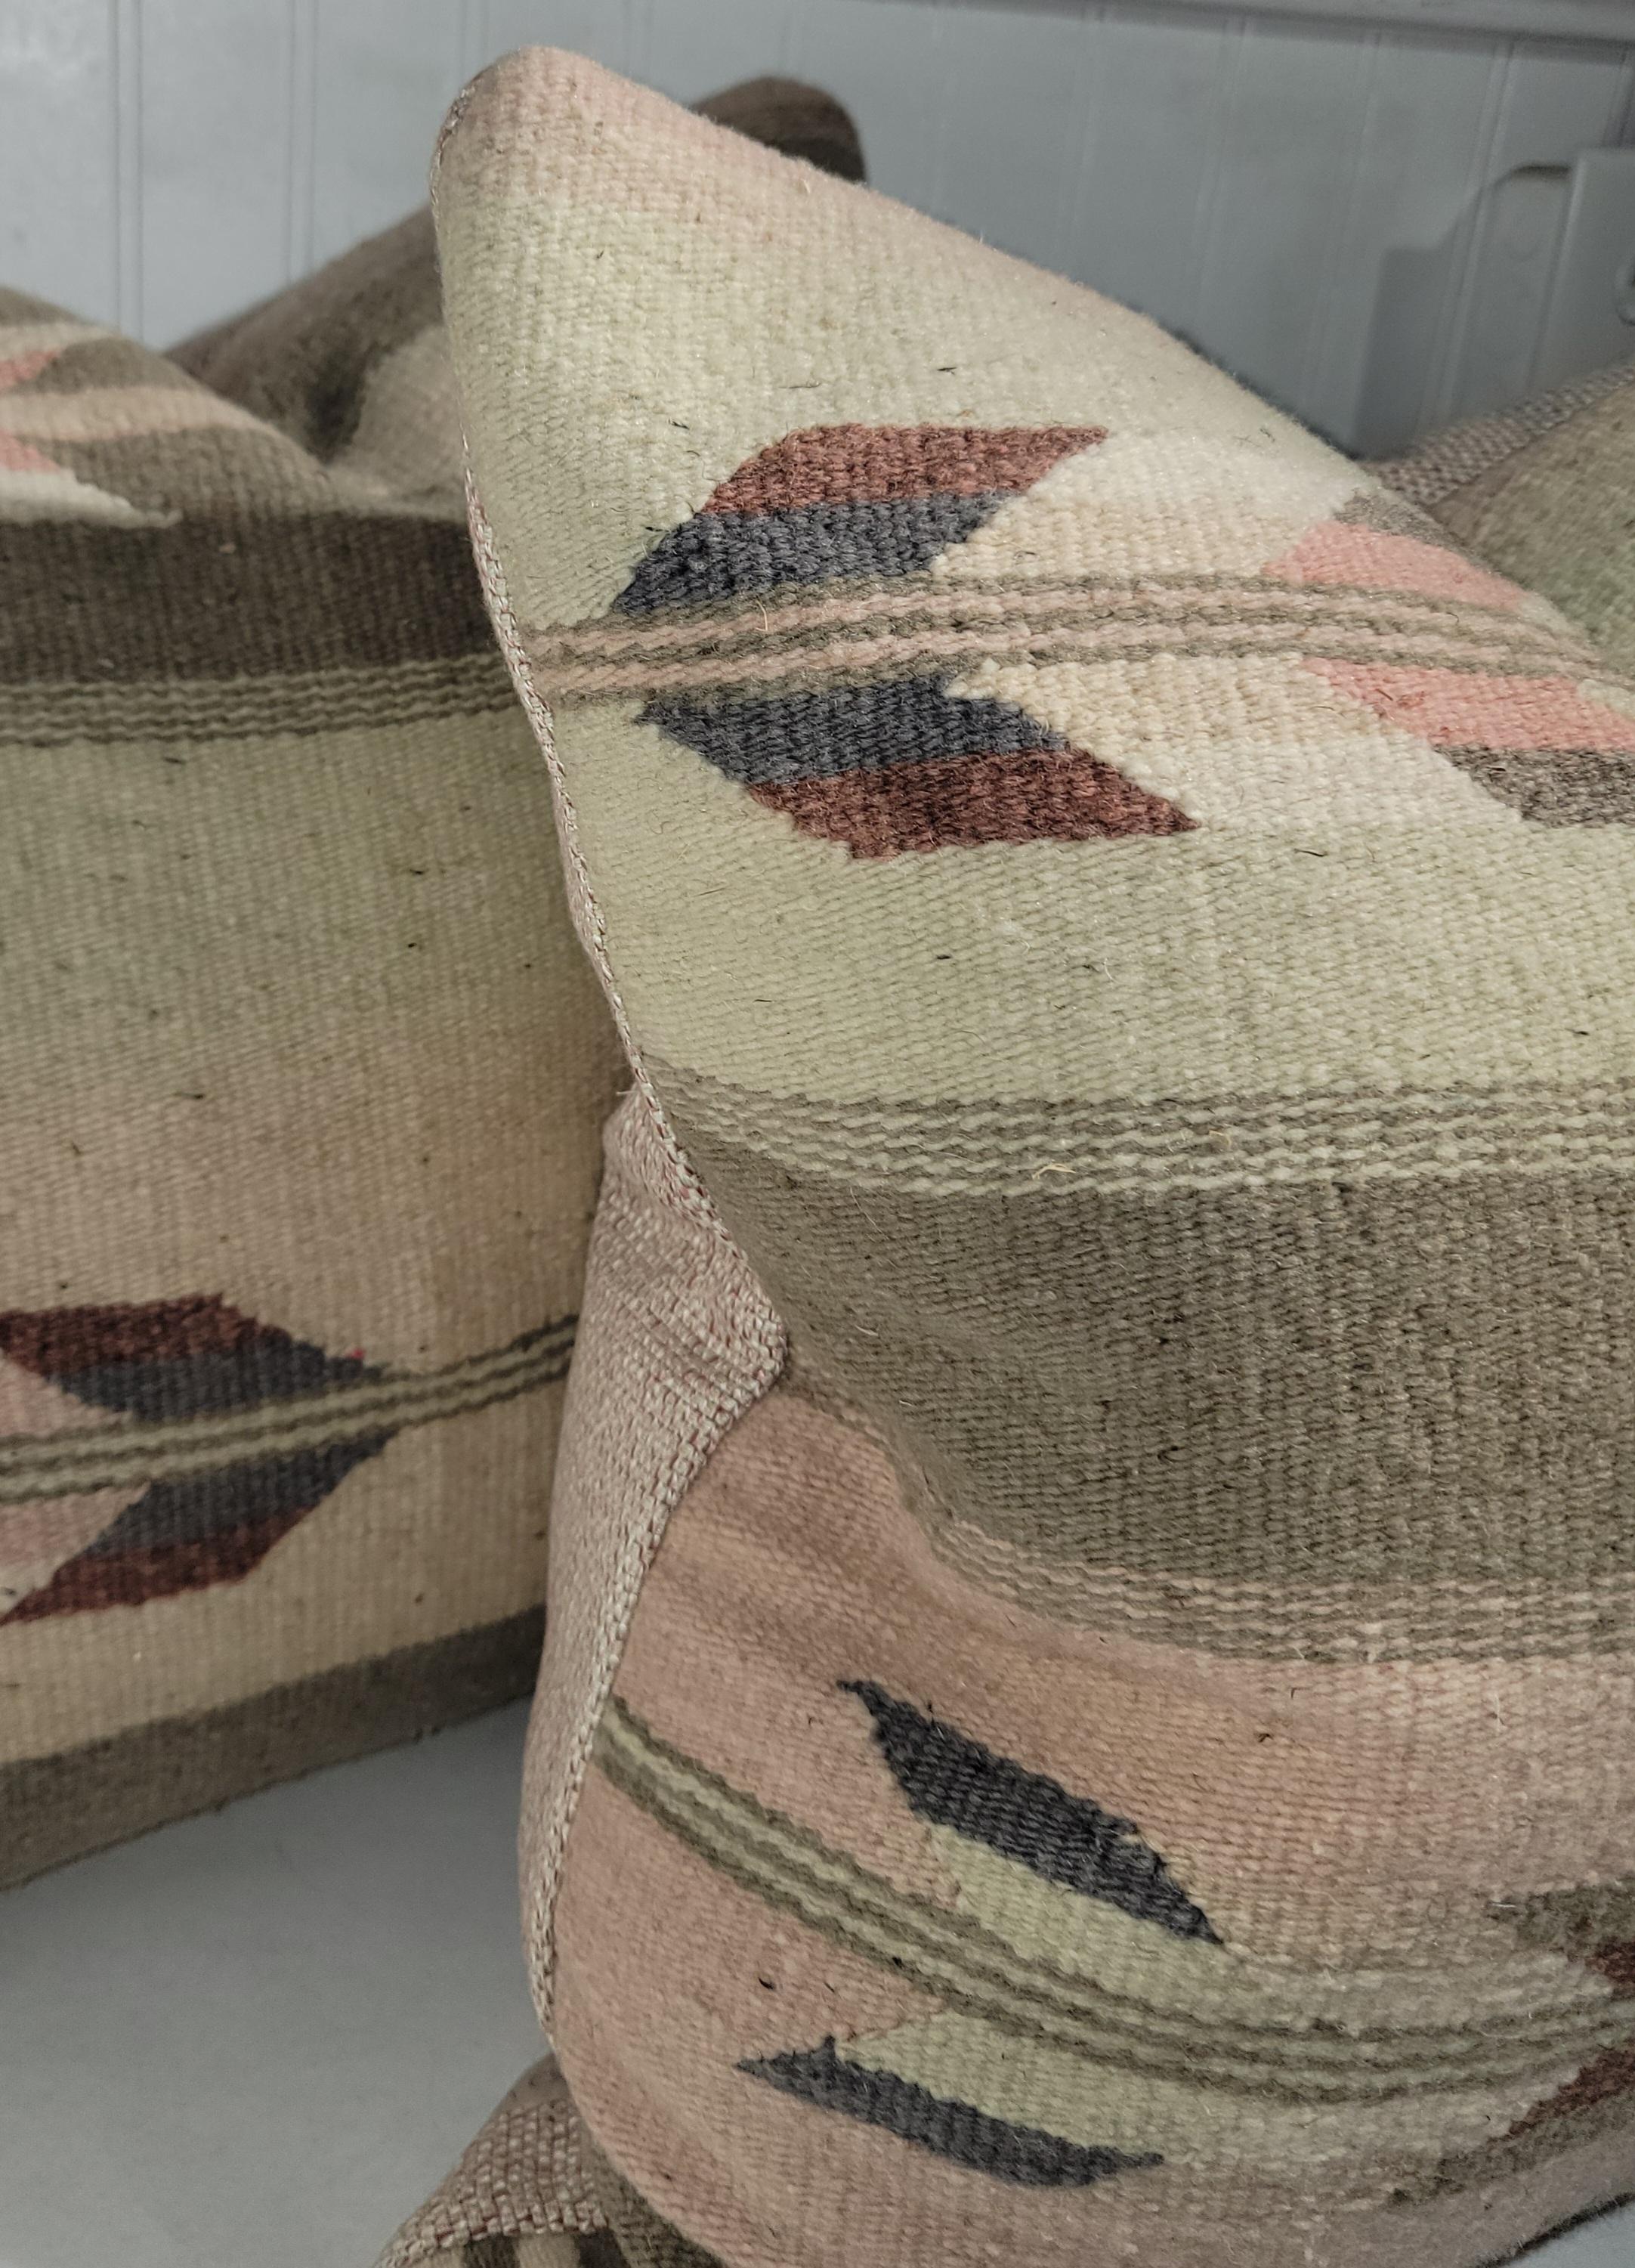 Pair of wool arrow pillows. 
This pair has beautiful earthy colors arrow pillows has a beautiful rich natural color pallet. These are great in a natural colored Adirondack room with a cabin like feel. Wonderful wool and linen make this pillow a